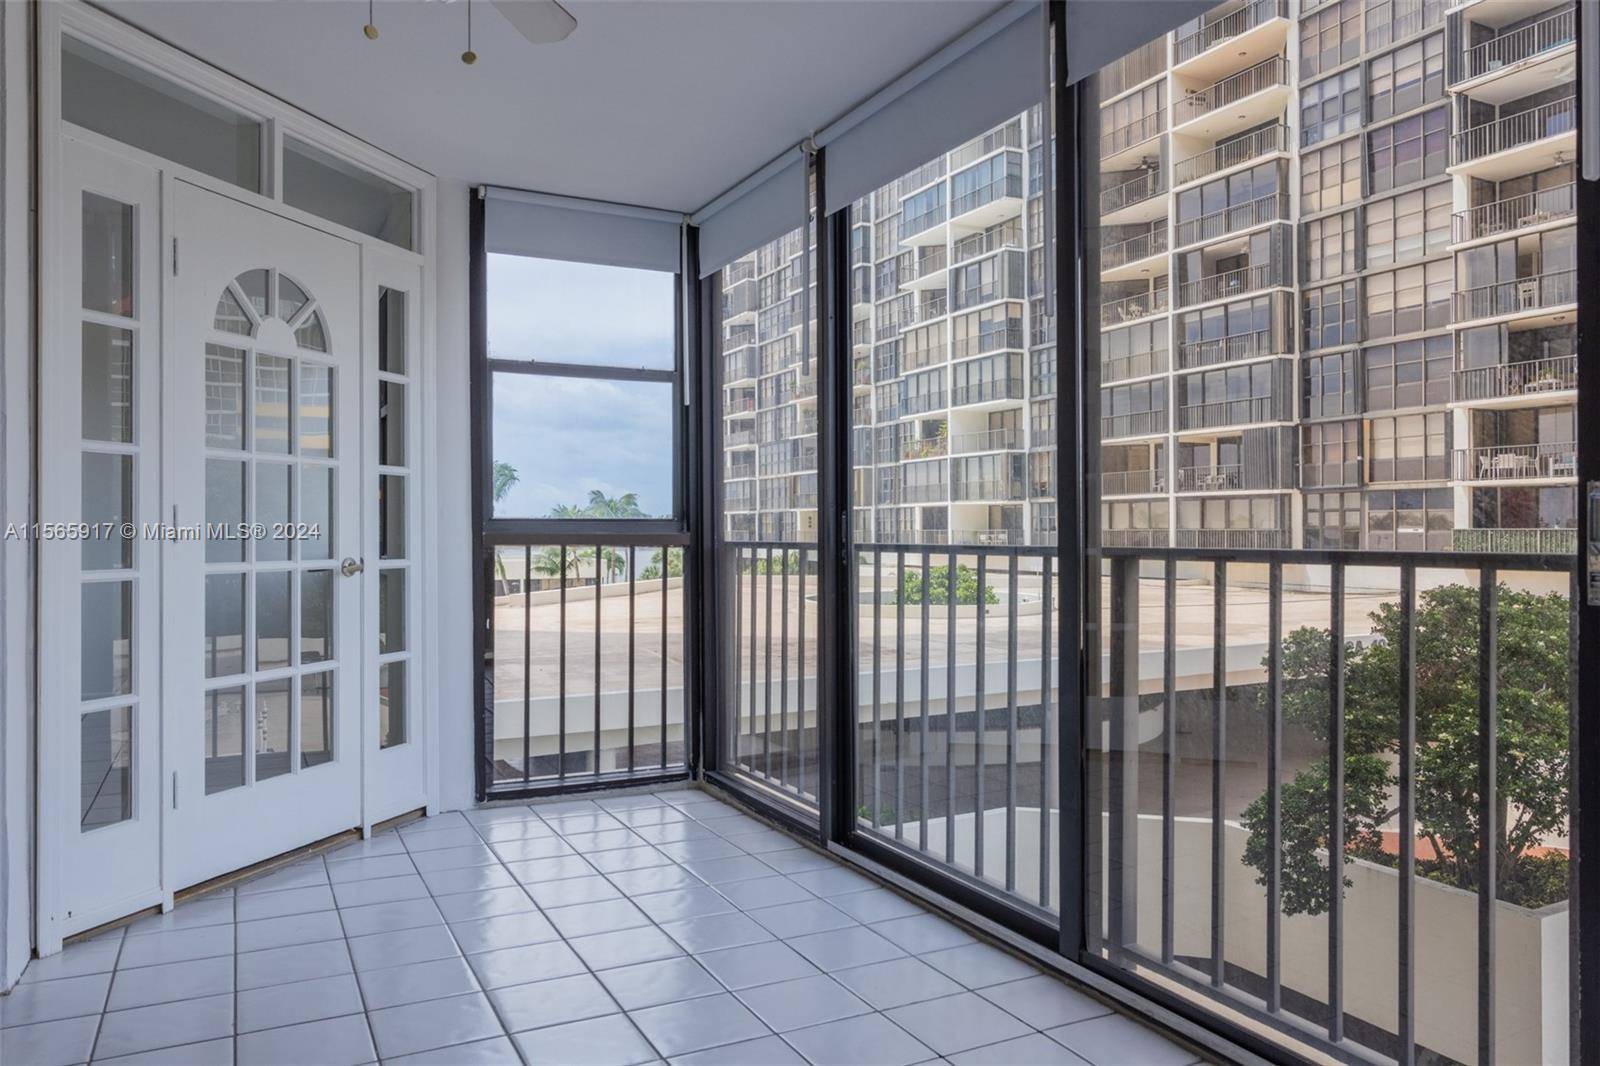 Prime 2 BDM 2 BATH Rental Opportunity Don't miss out on this fantastic rental opportunity in the heart of Brickell, enjoy easy access to top dining, shopping, and entertainment destinations.